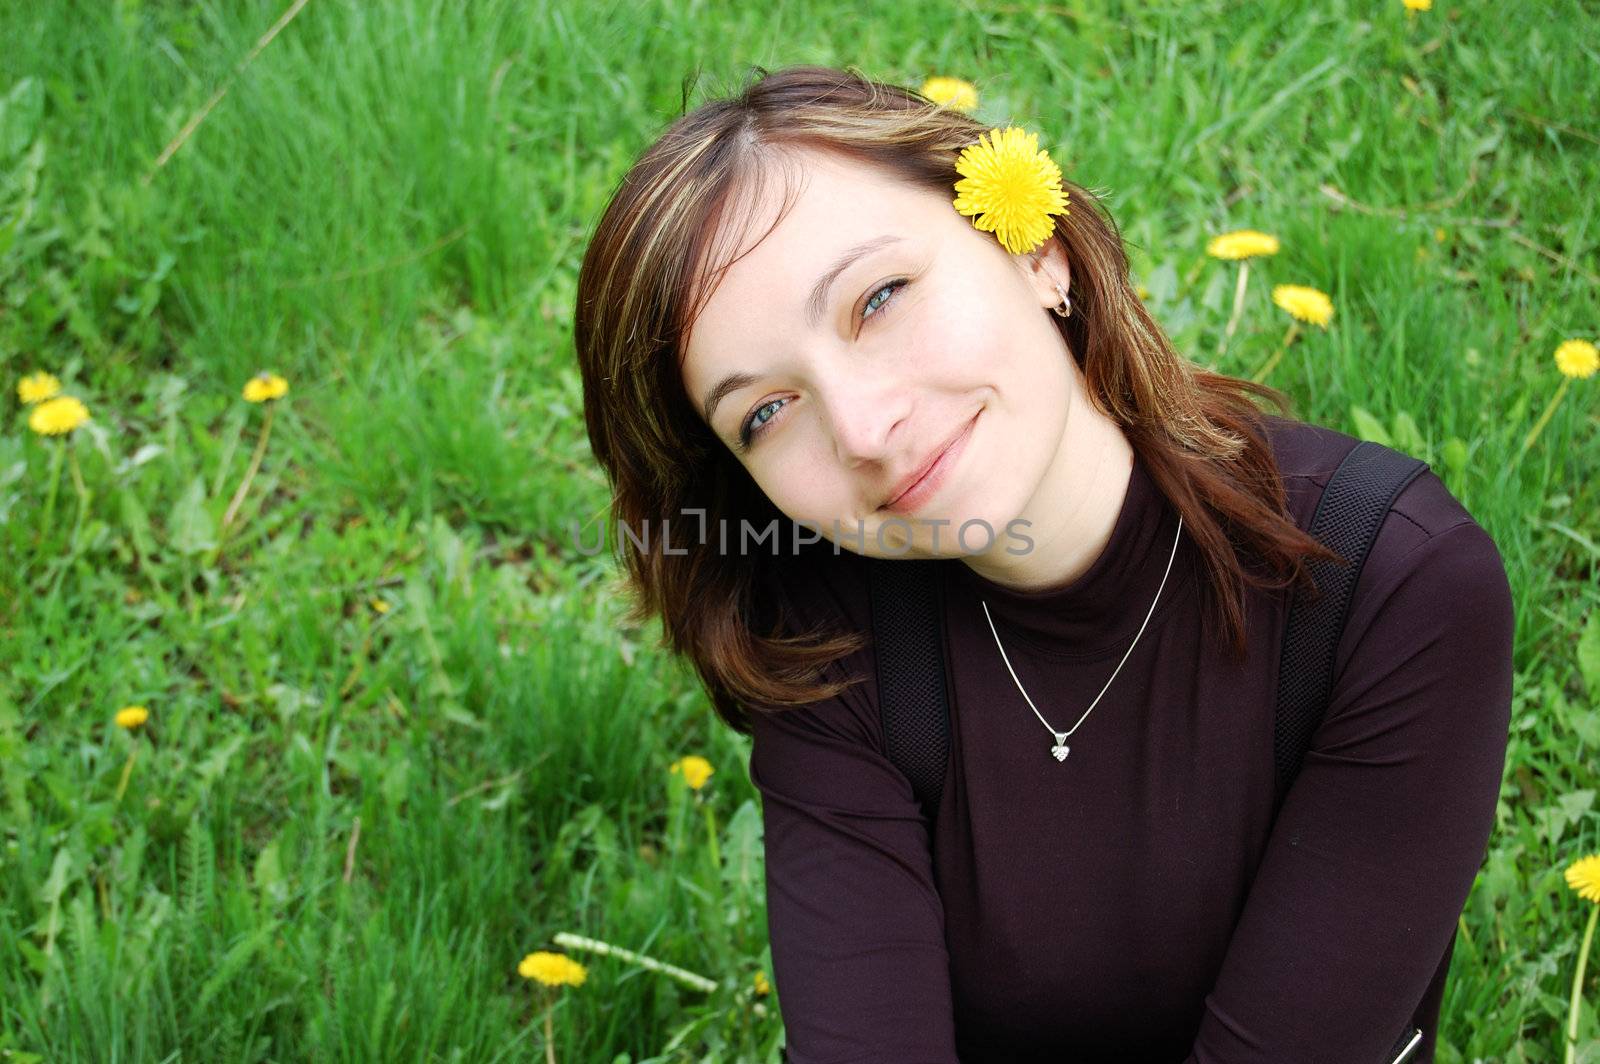 Girl with dandelion over green grass